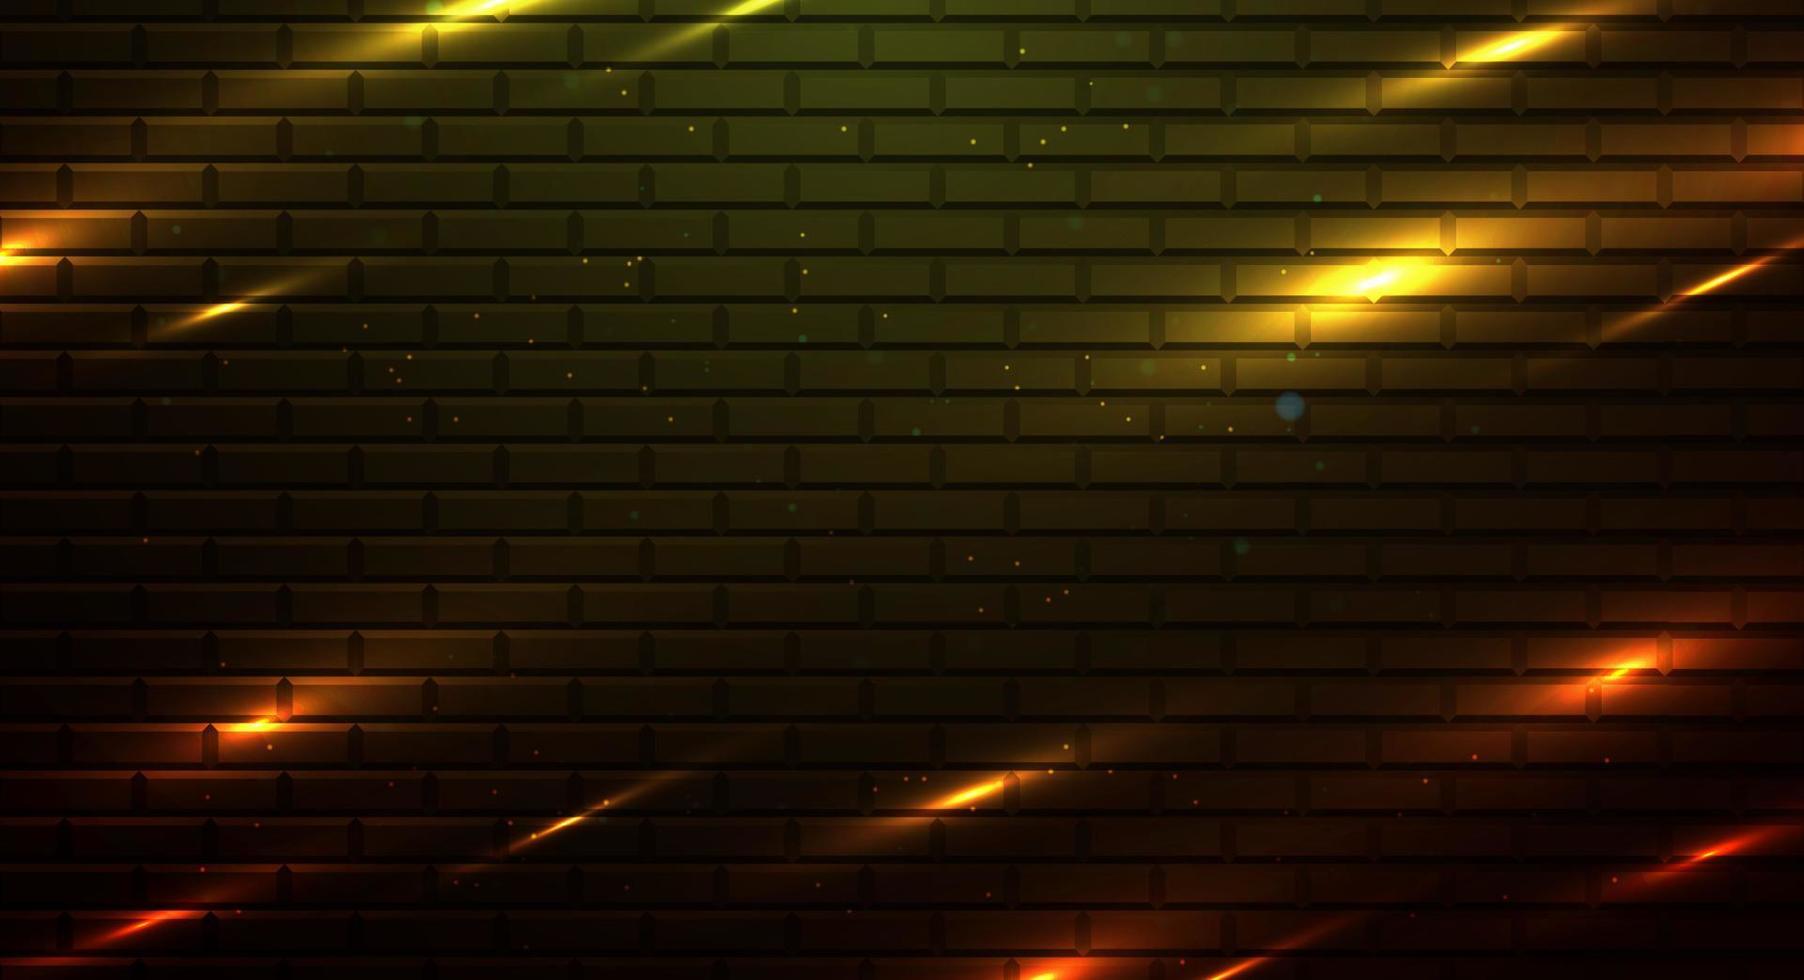 Dark wall vector background with yellow light. Suitable for street wall theme.